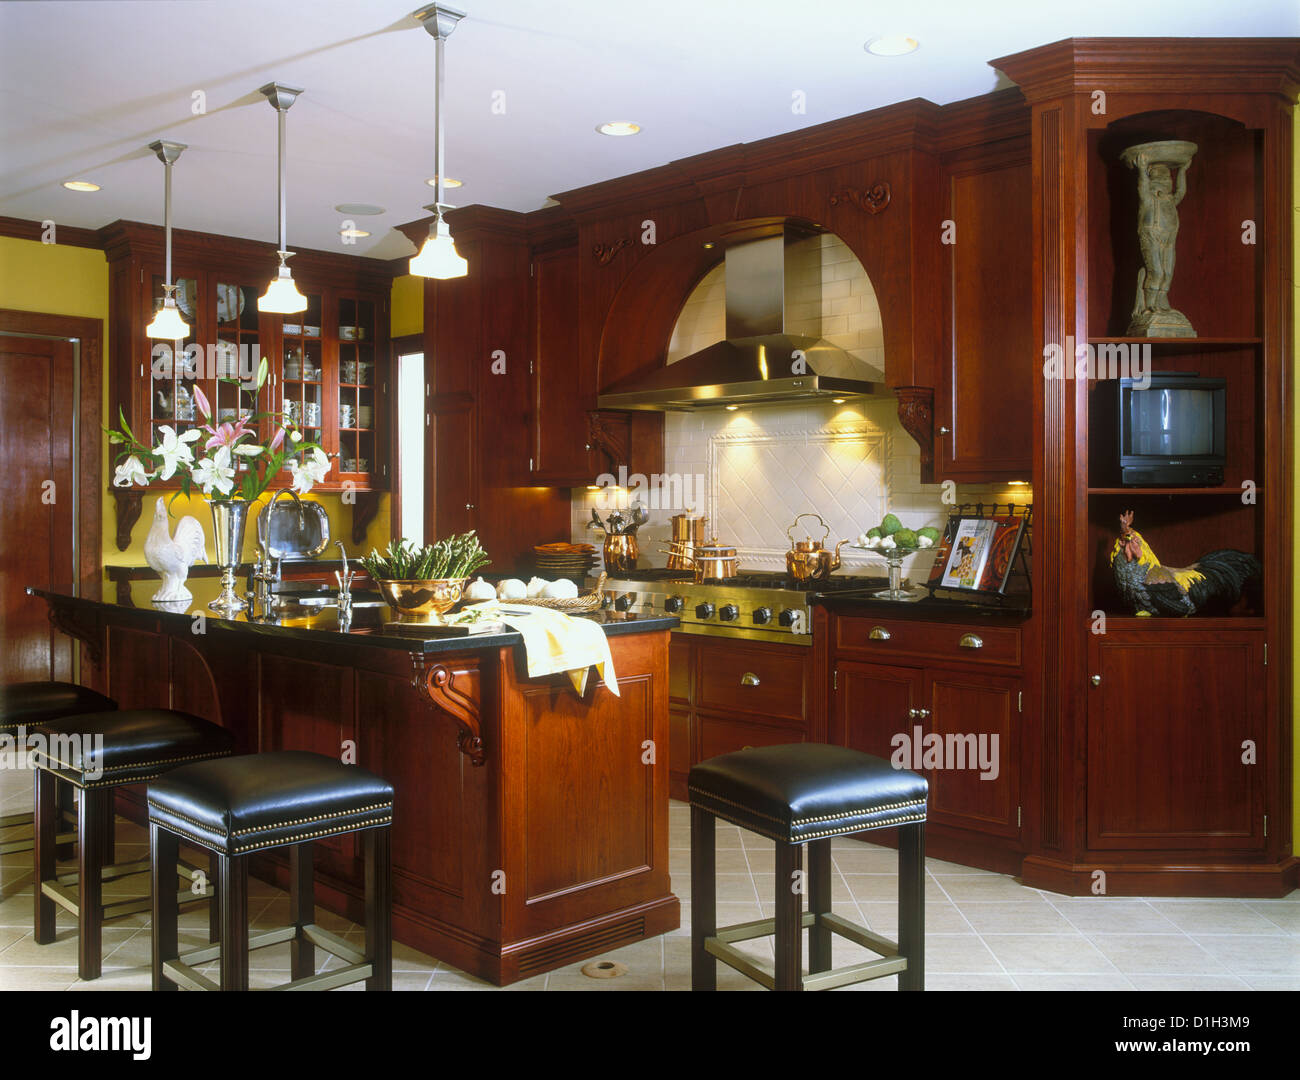 KITCHENS Cherry cabinets island with eating bar stools Countertops are black marble or granite Copper pots on stove ceramic Stock Photo